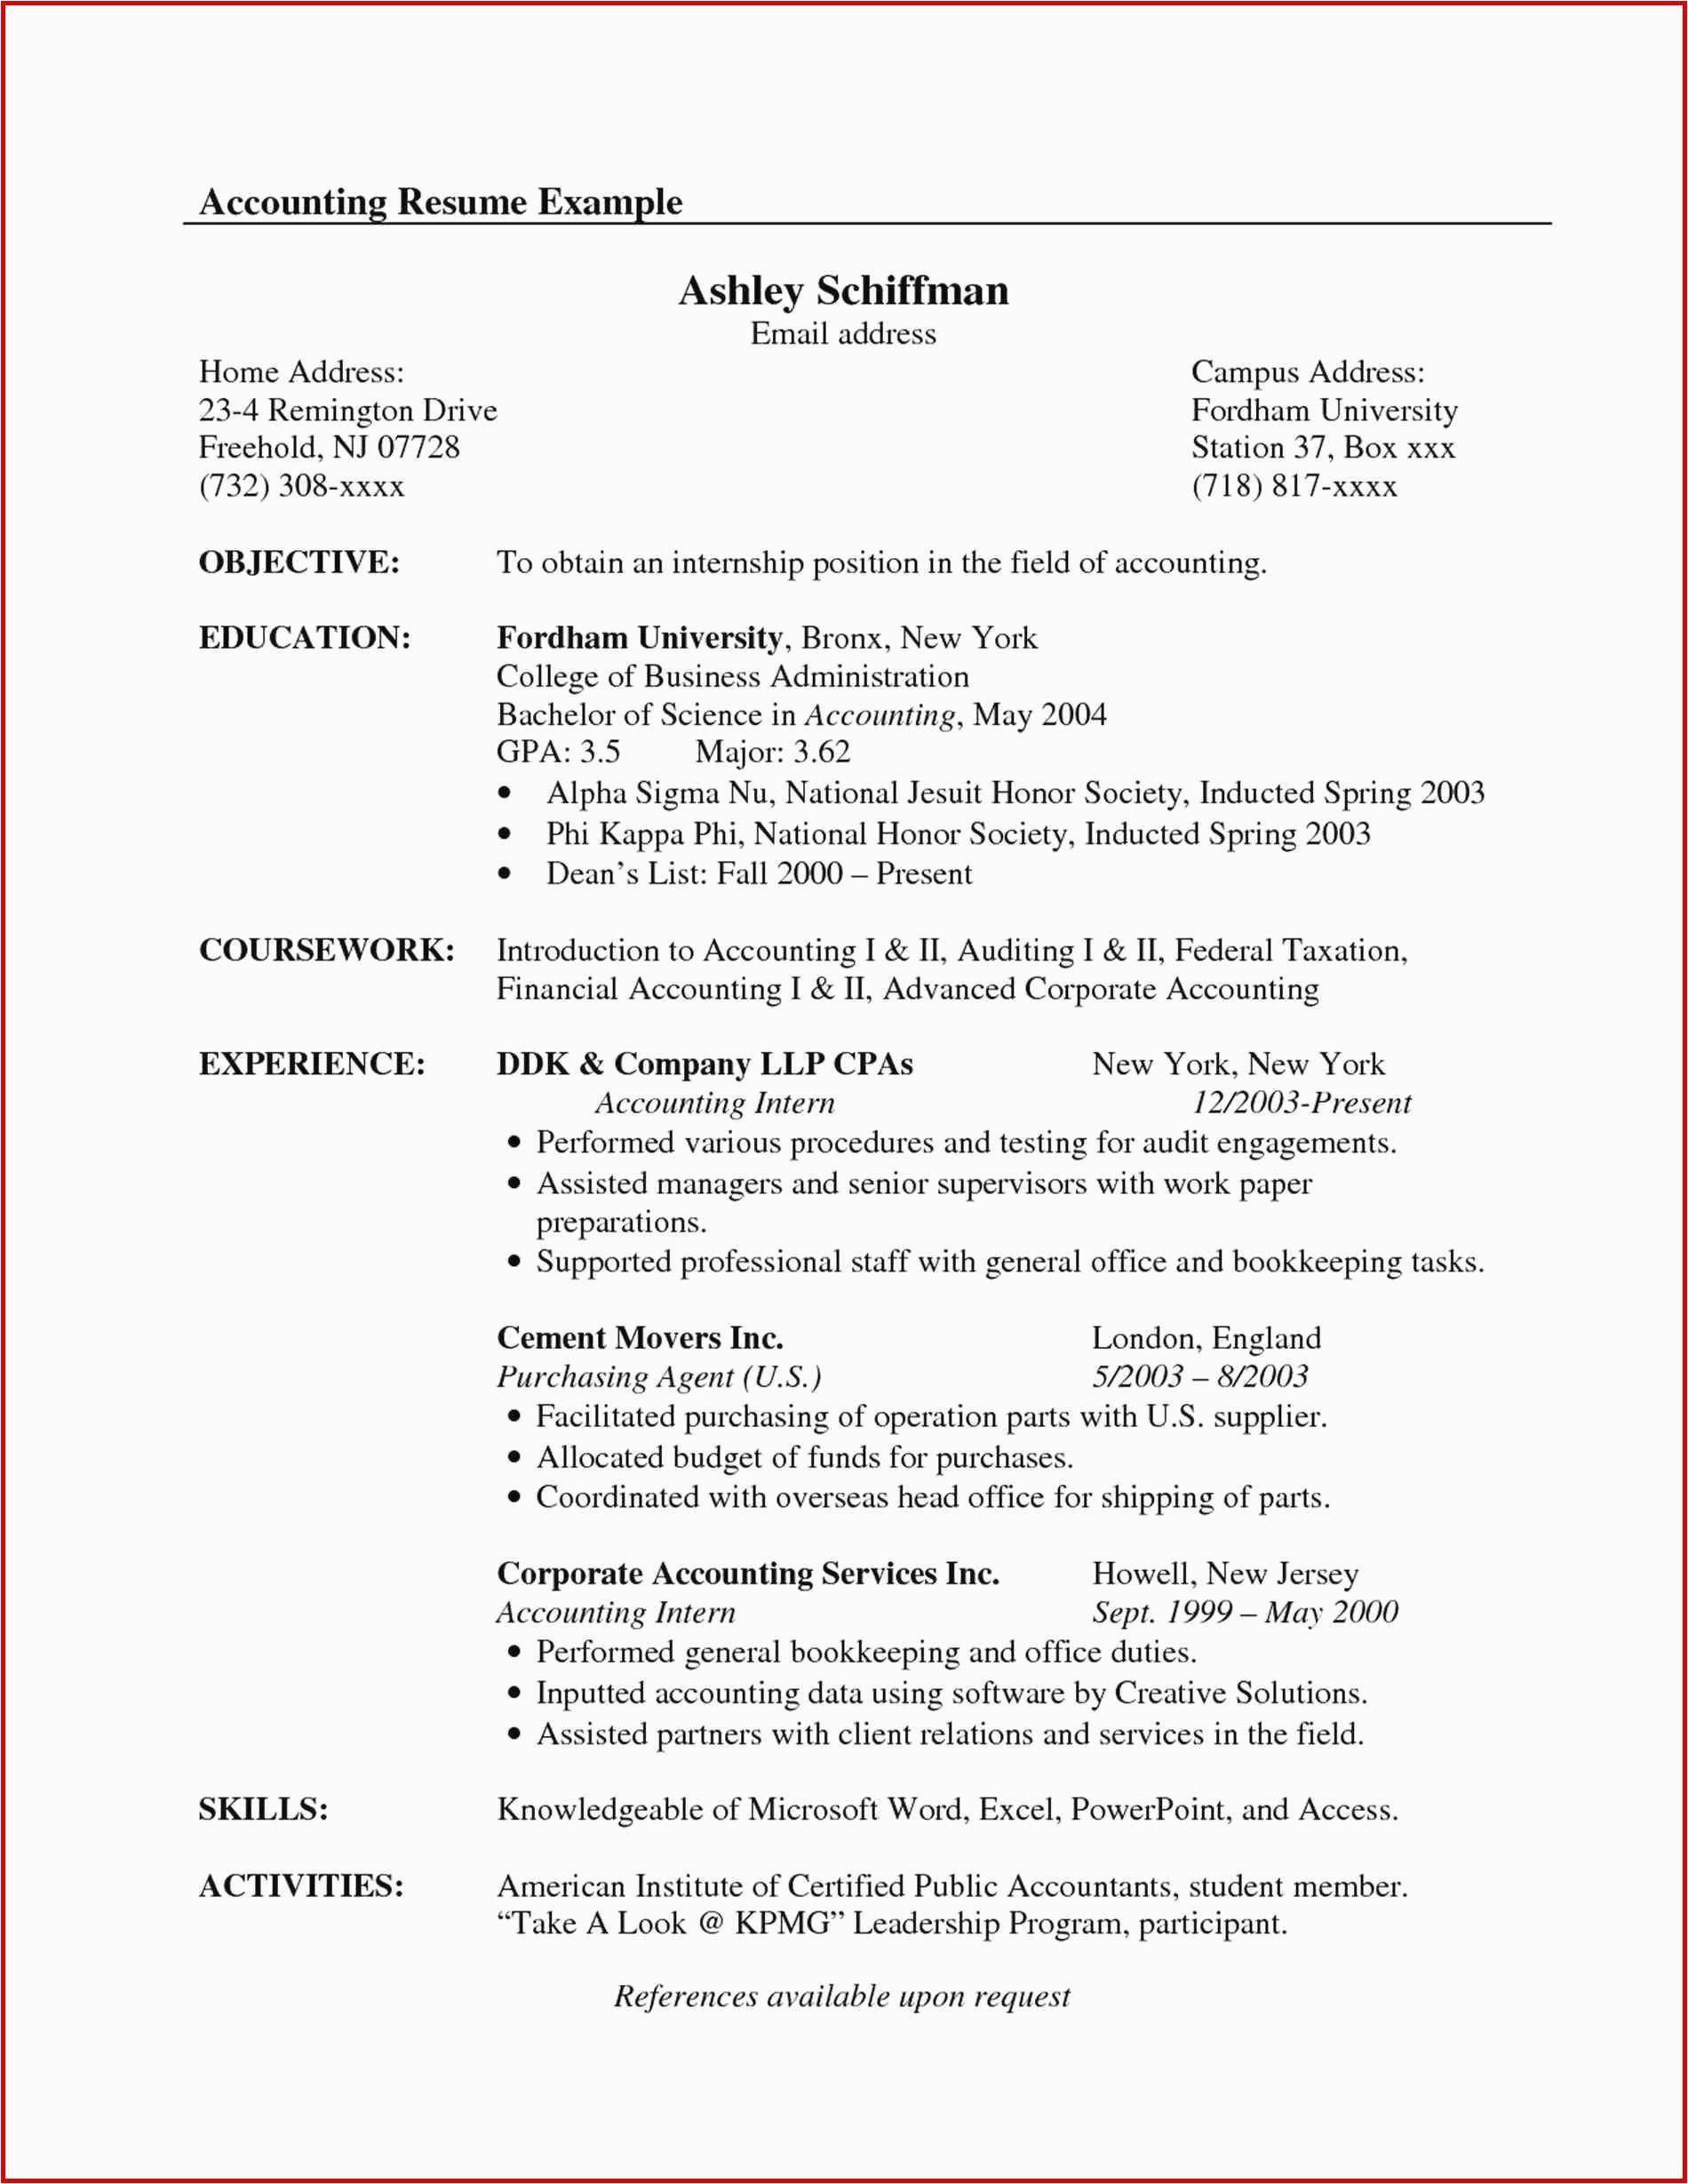 Sample Of Resume Objective for Accountant Job Objective Accounting Supervisor